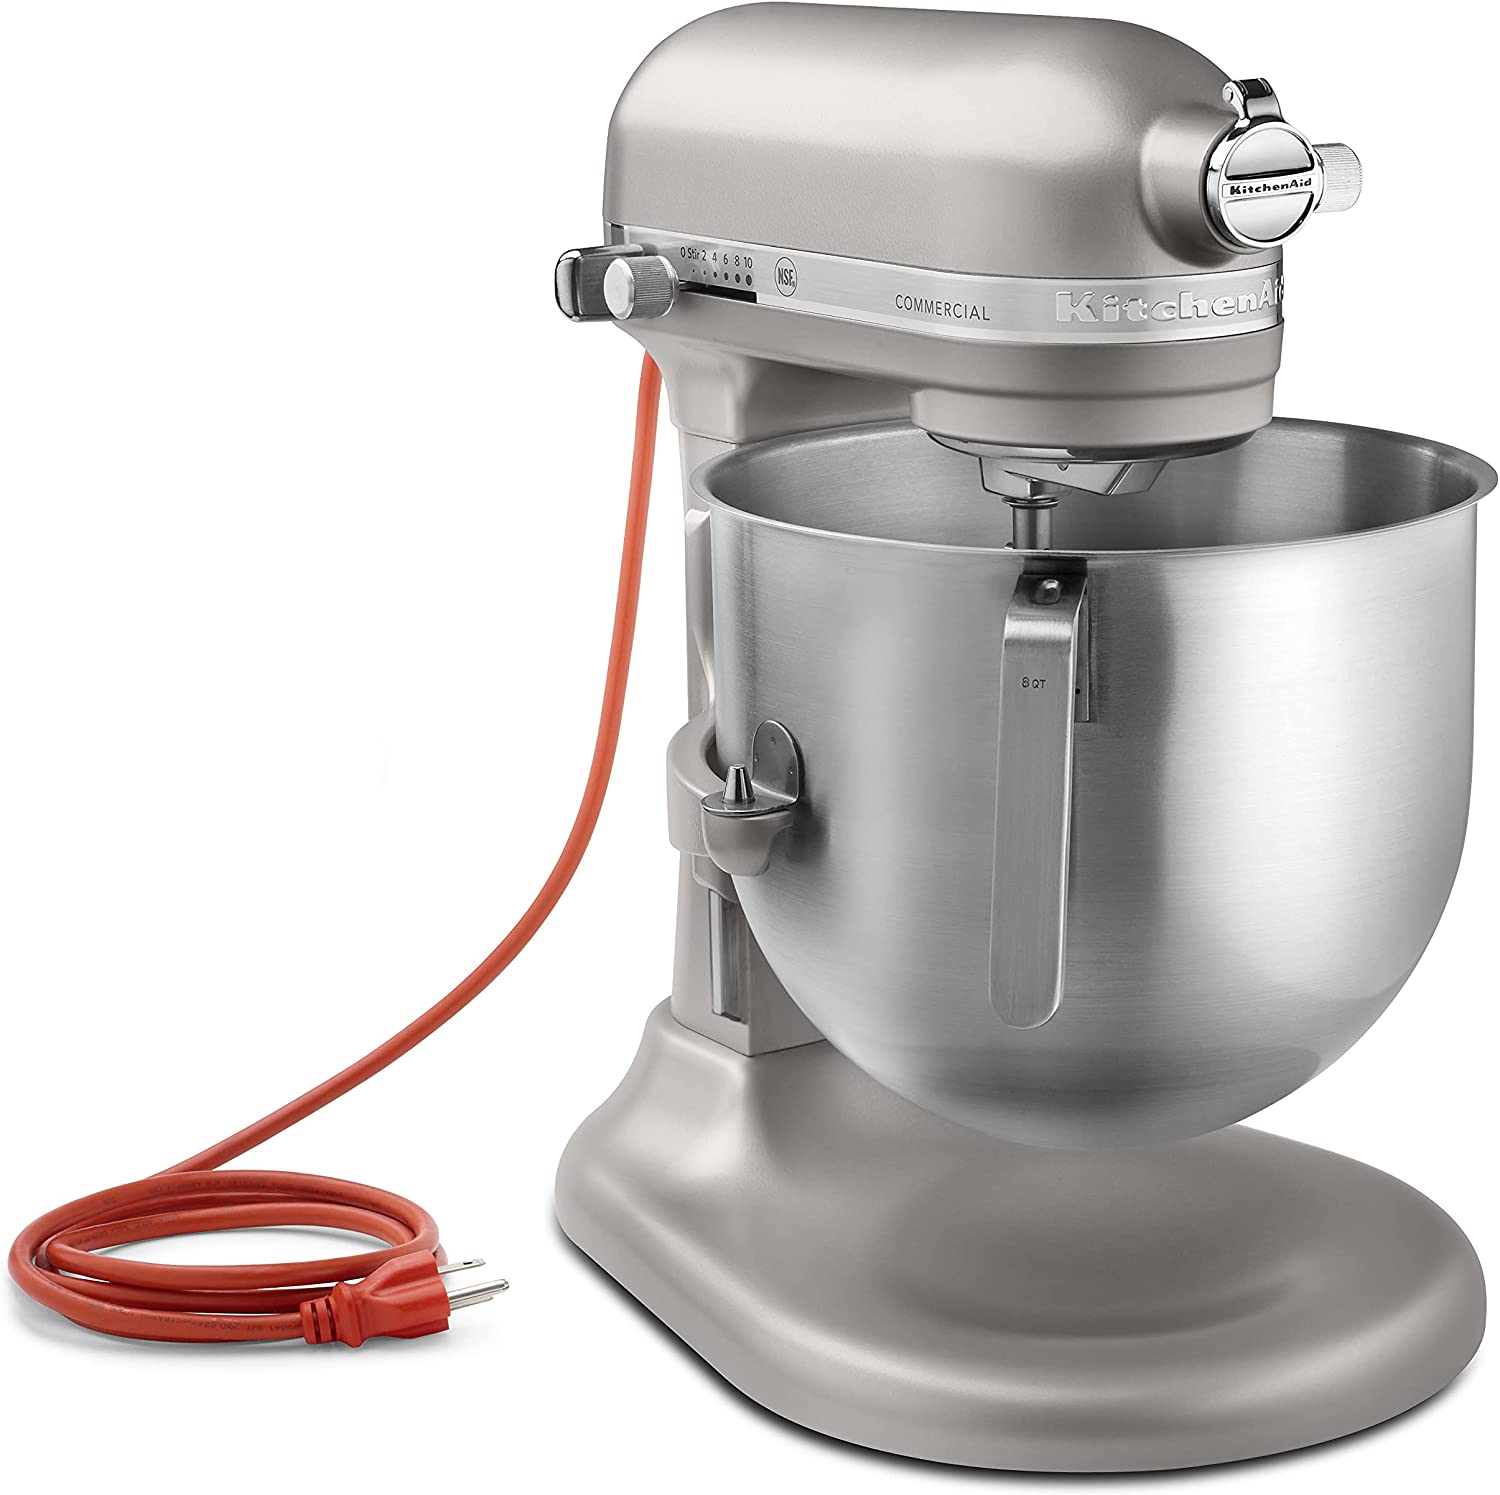 Series 8-Qt Lift Stand Mixer Pearl (KSM8990NP) - Plant Based Pros